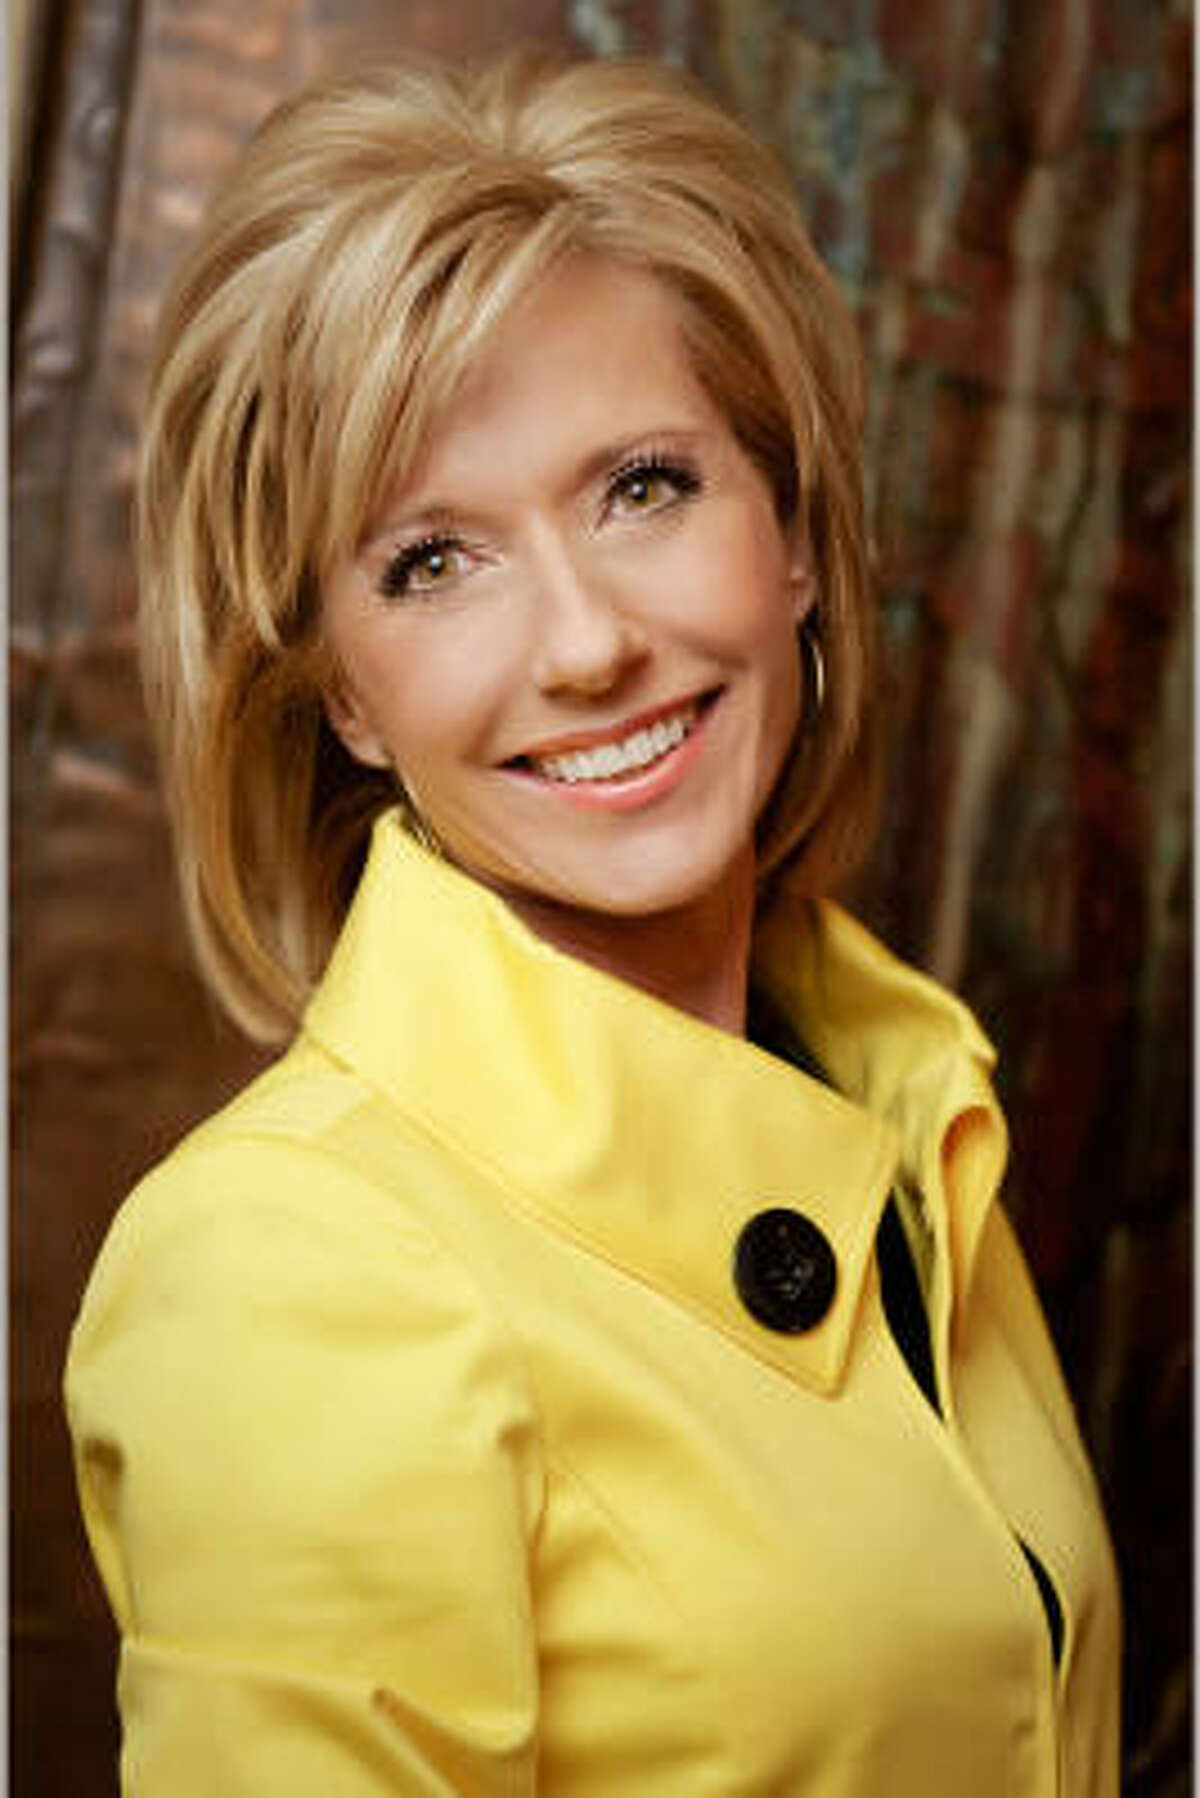 Beth Moore wants women to live with dignity